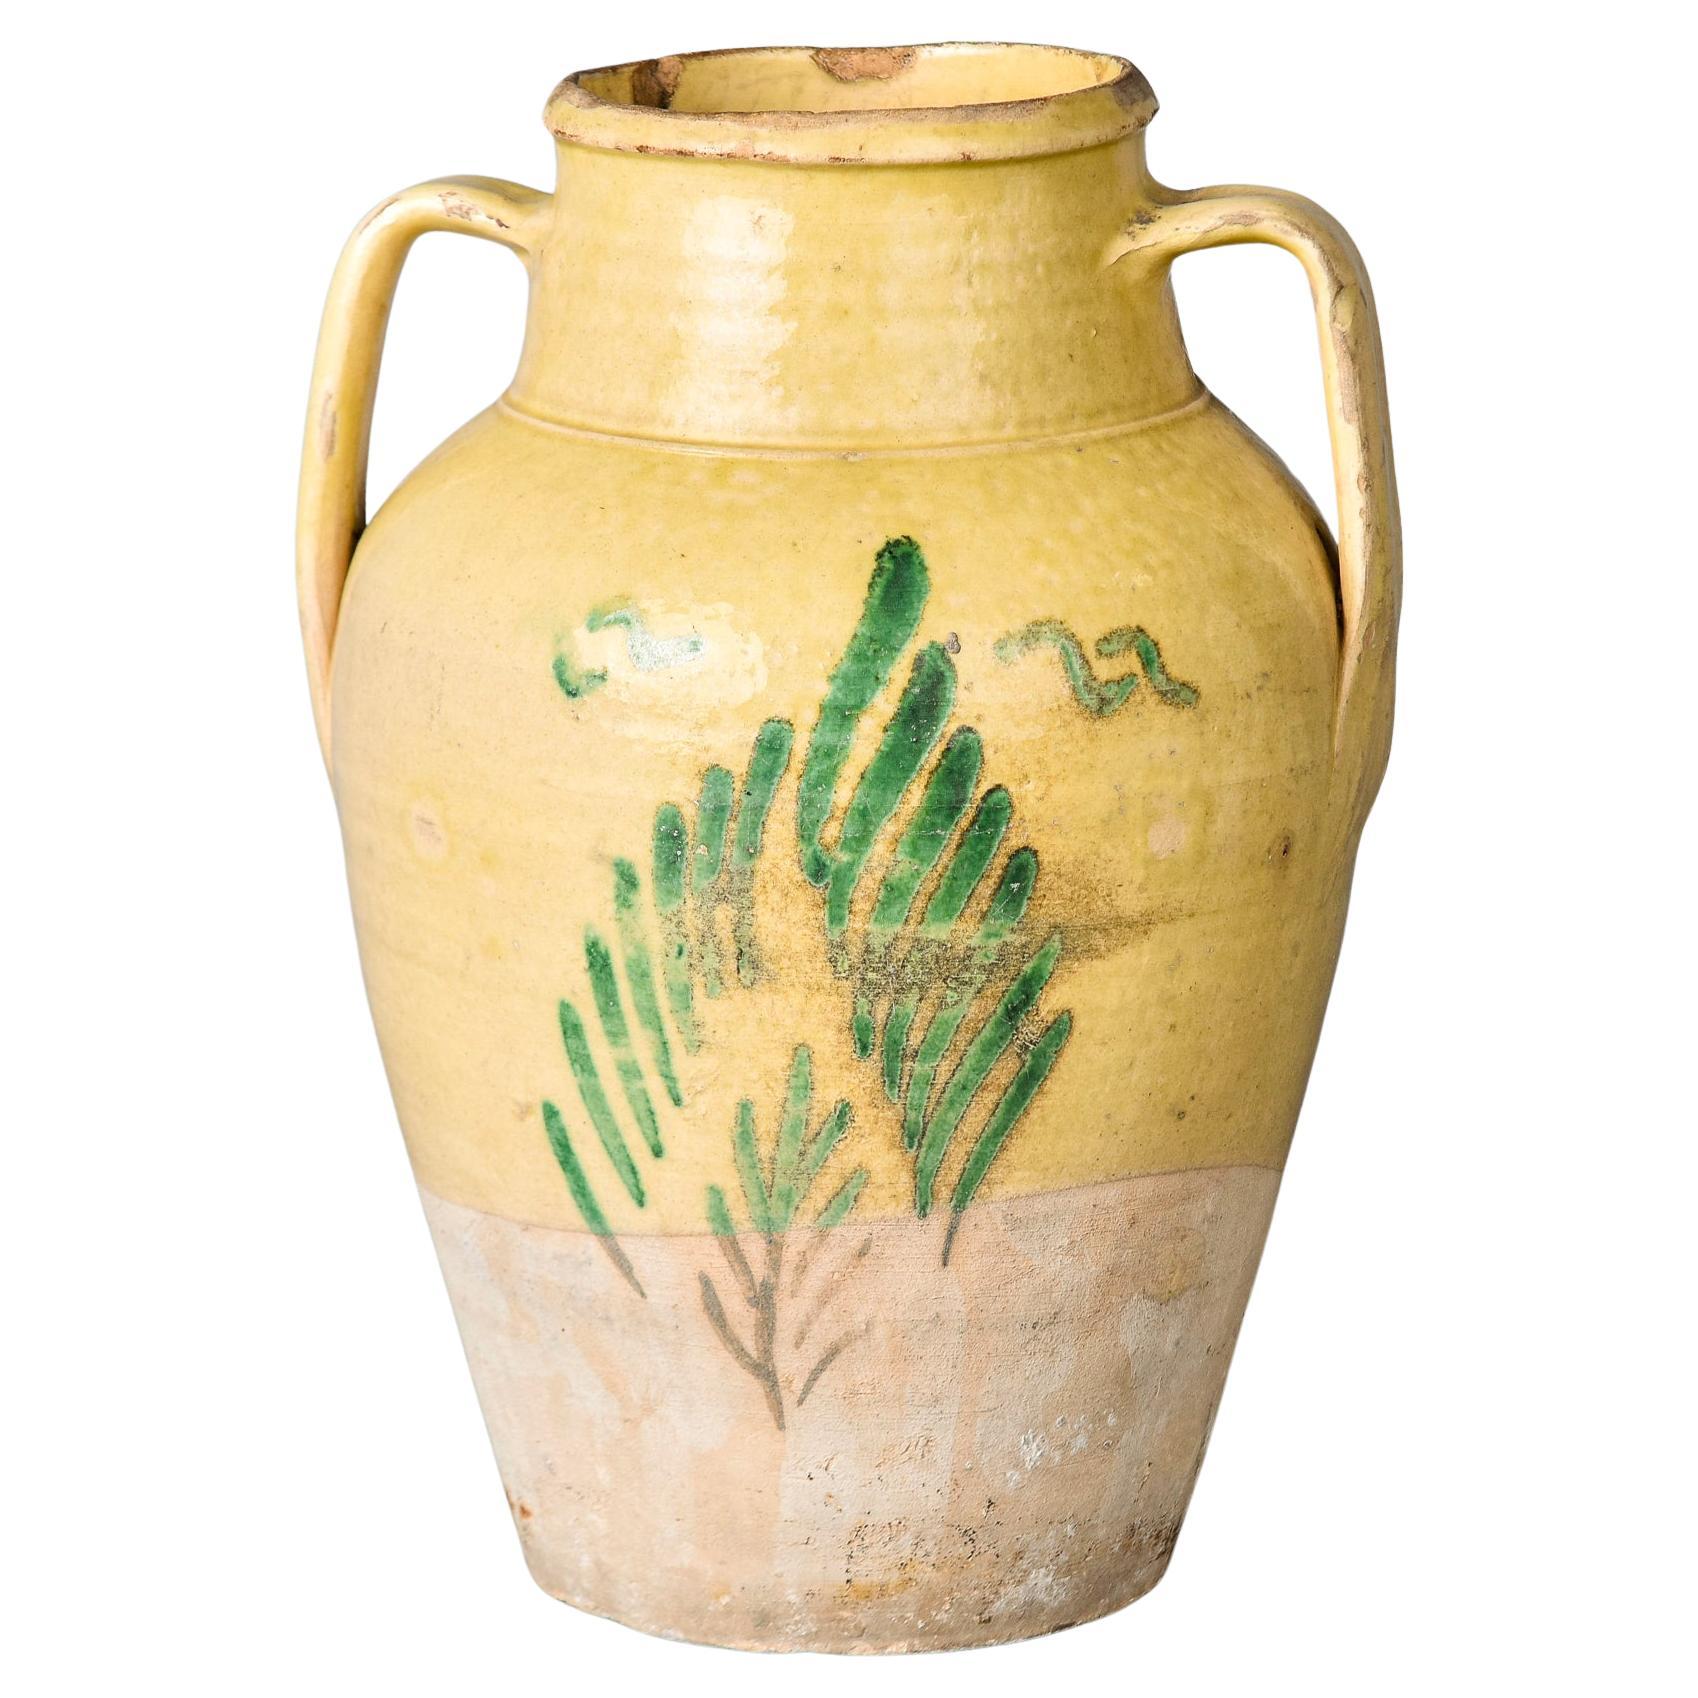 Early 20th Century French Earthenware Pot with Handles and Green Branches   